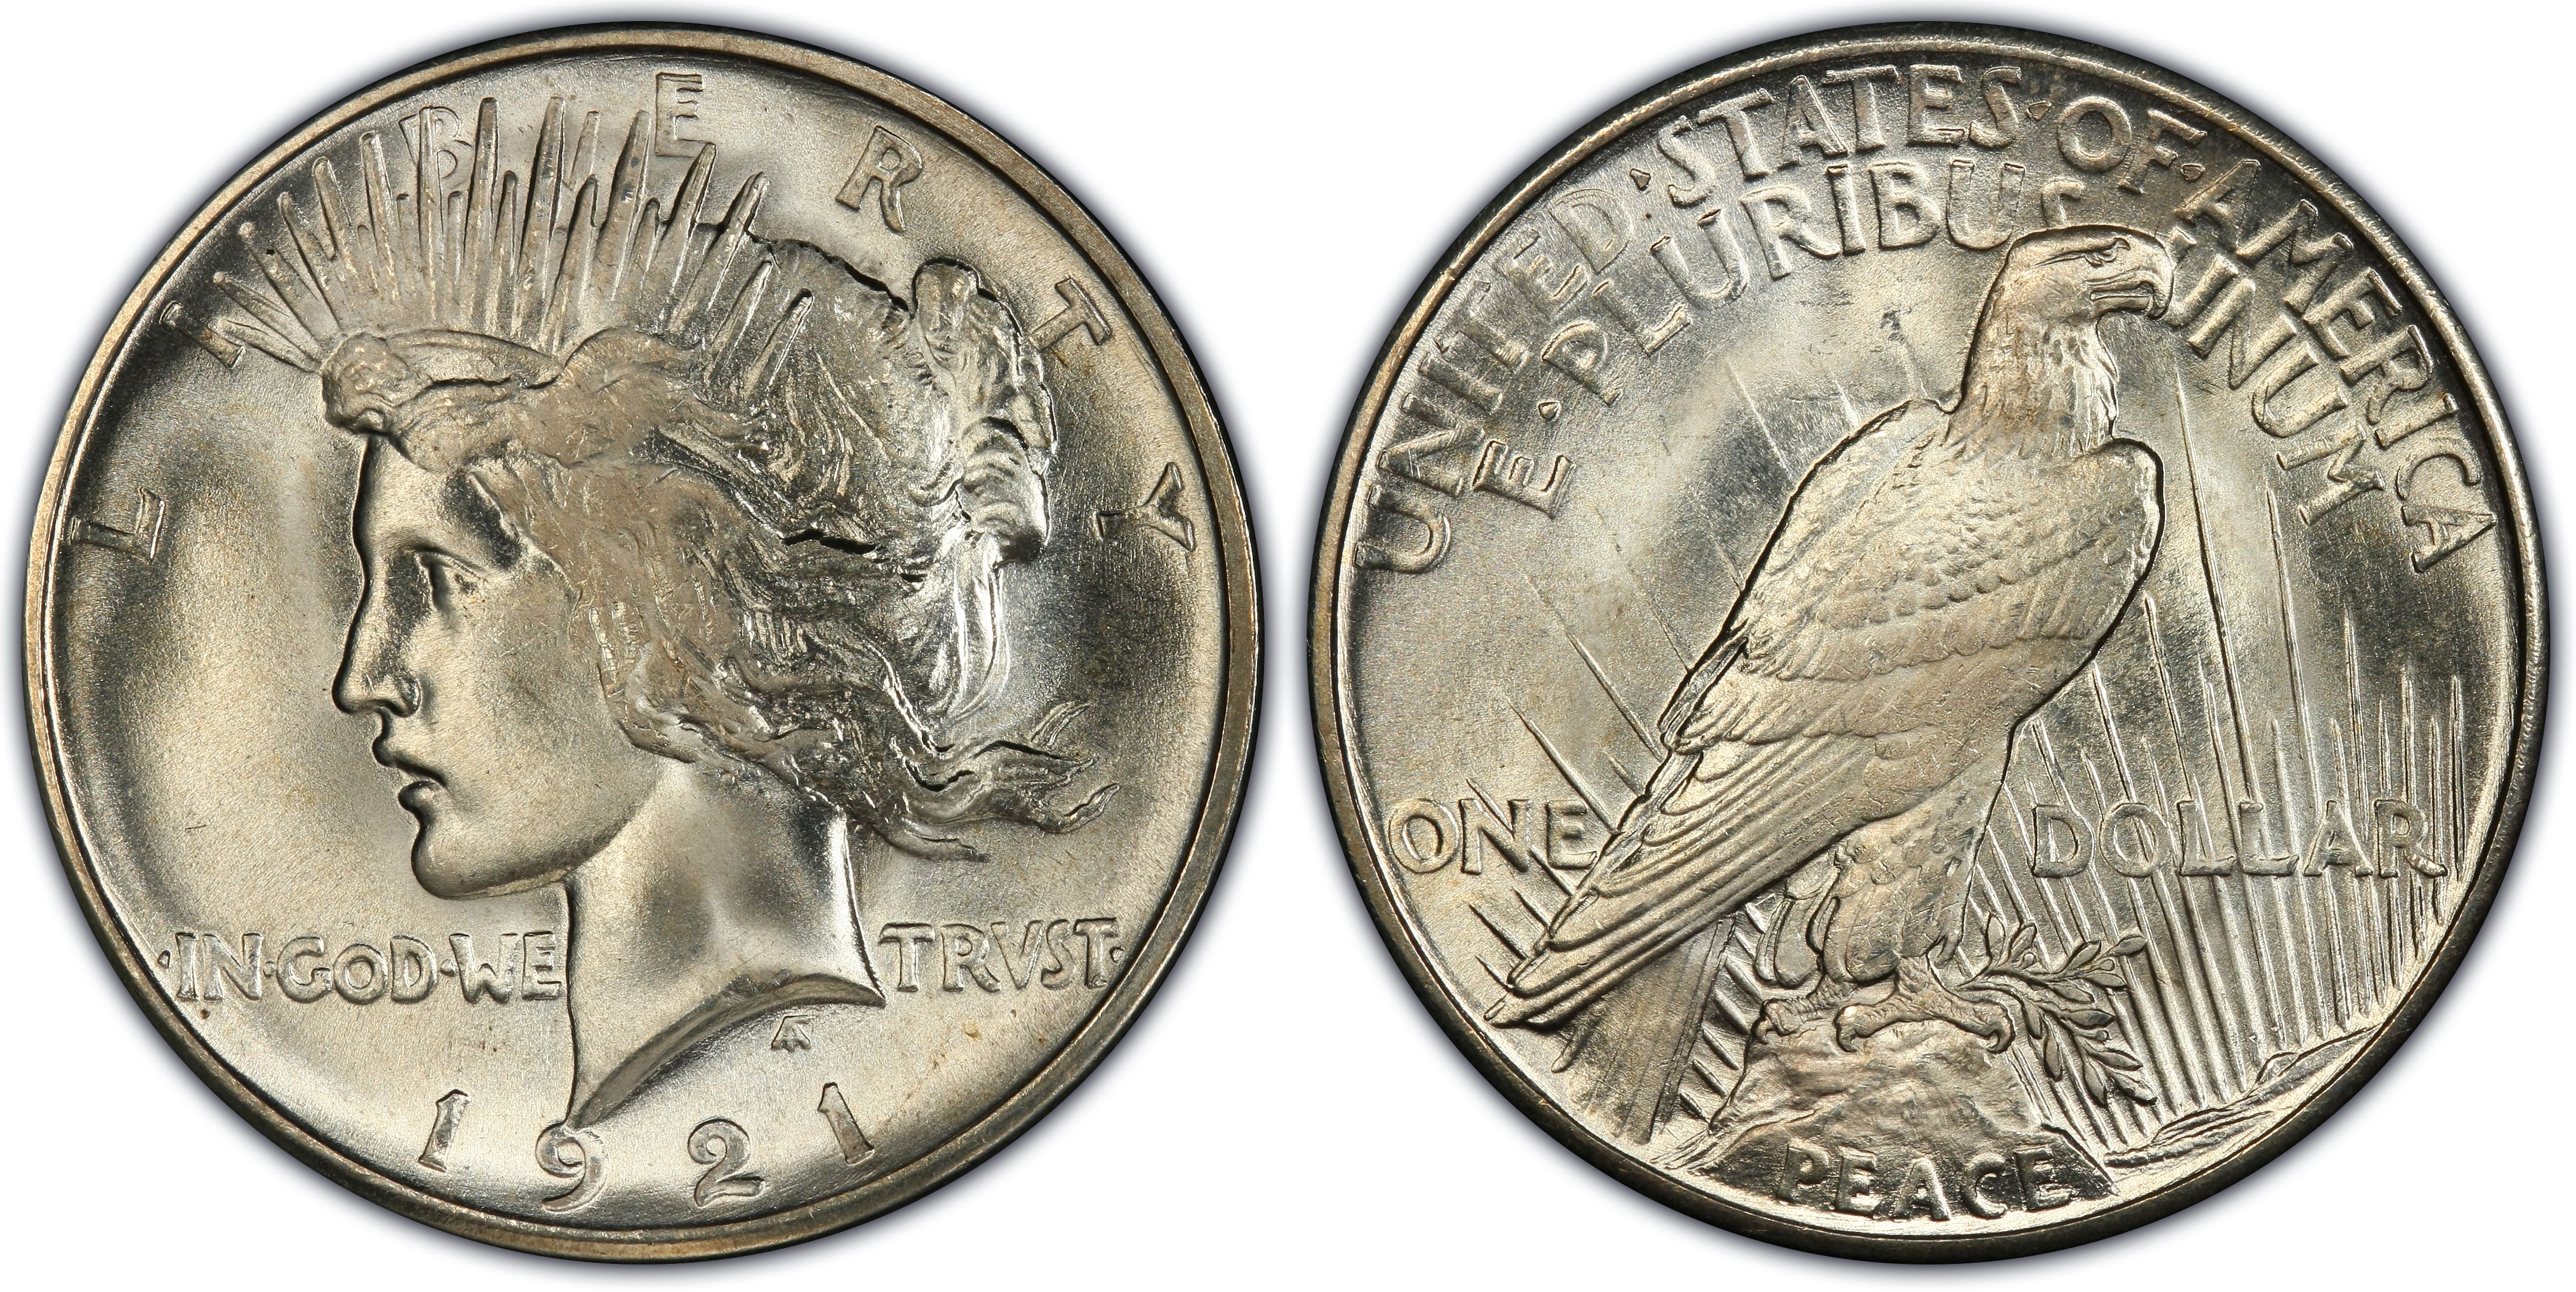 1921 1 High Relief Peace Regular Strike Peace Dollar Pcgs Coinfacts,Scotch On The Rocks Drink